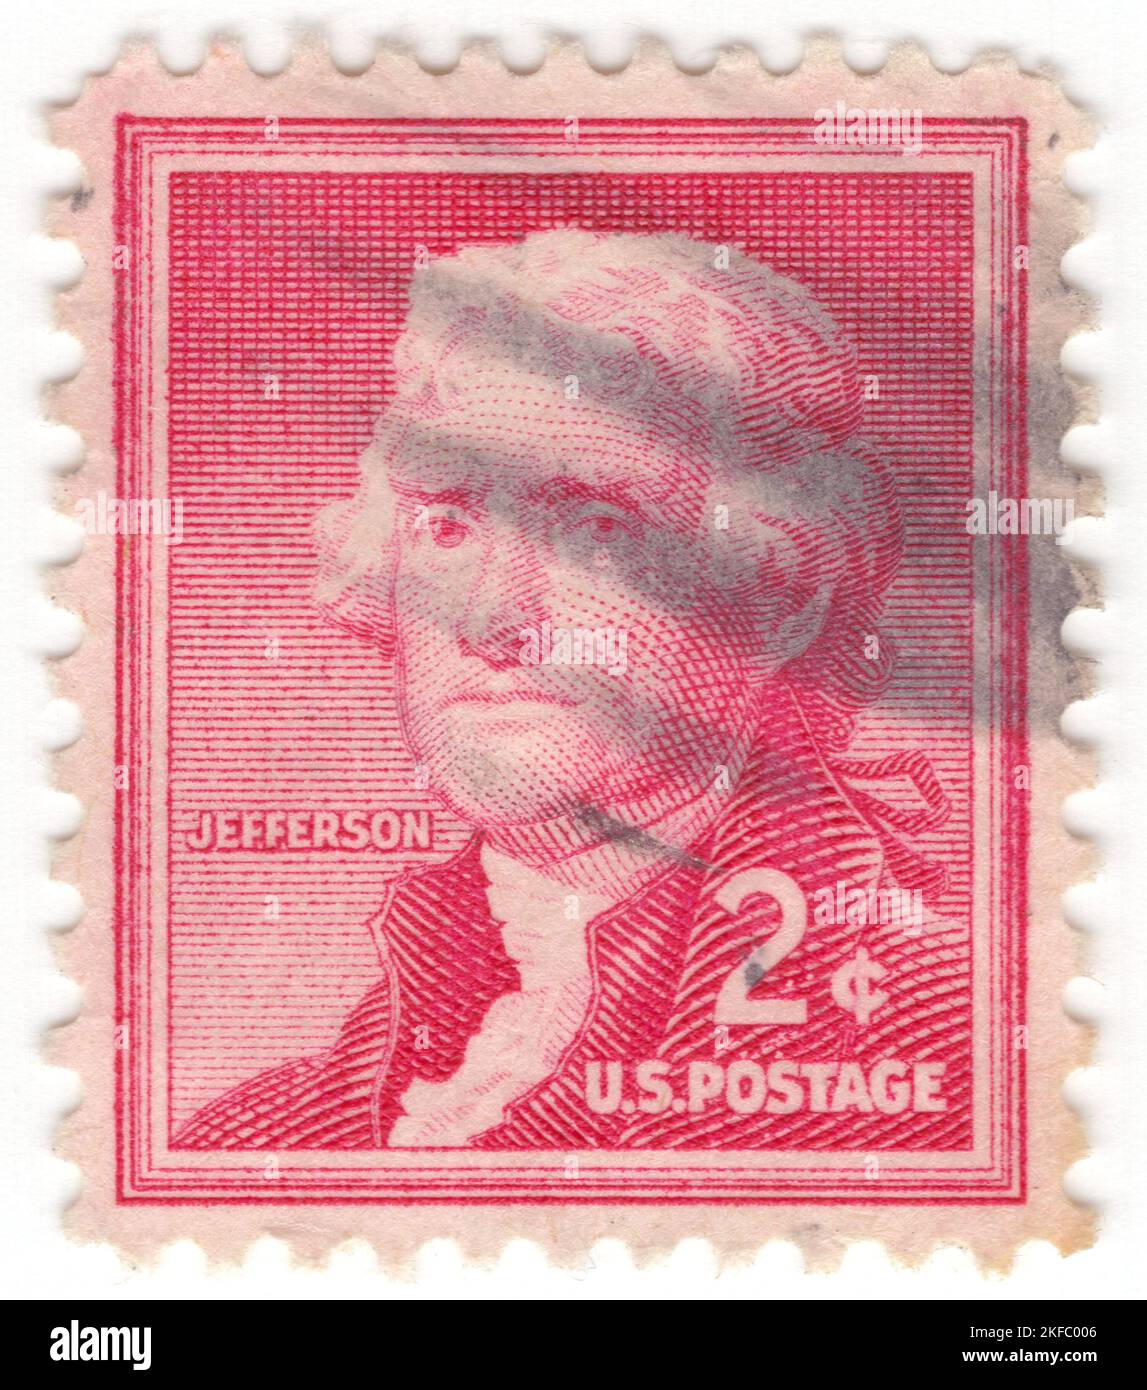 USA - 1954: An 2 cents carmine-rose postage stamp depicting portrait of Thomas Jefferson, American statesman, diplomat, lawyer, architect, philosopher, and Founding Father who served as the third president of the United States from 1801 to 1809. He was previously the second vice president under John Adams and the first United States secretary of state under George Washington. The principal author of the Declaration of Independence, Jefferson was a proponent of democracy, republicanism, and individual rights, motivating American colonists to break from the Kingdom of Great Britain Stock Photo